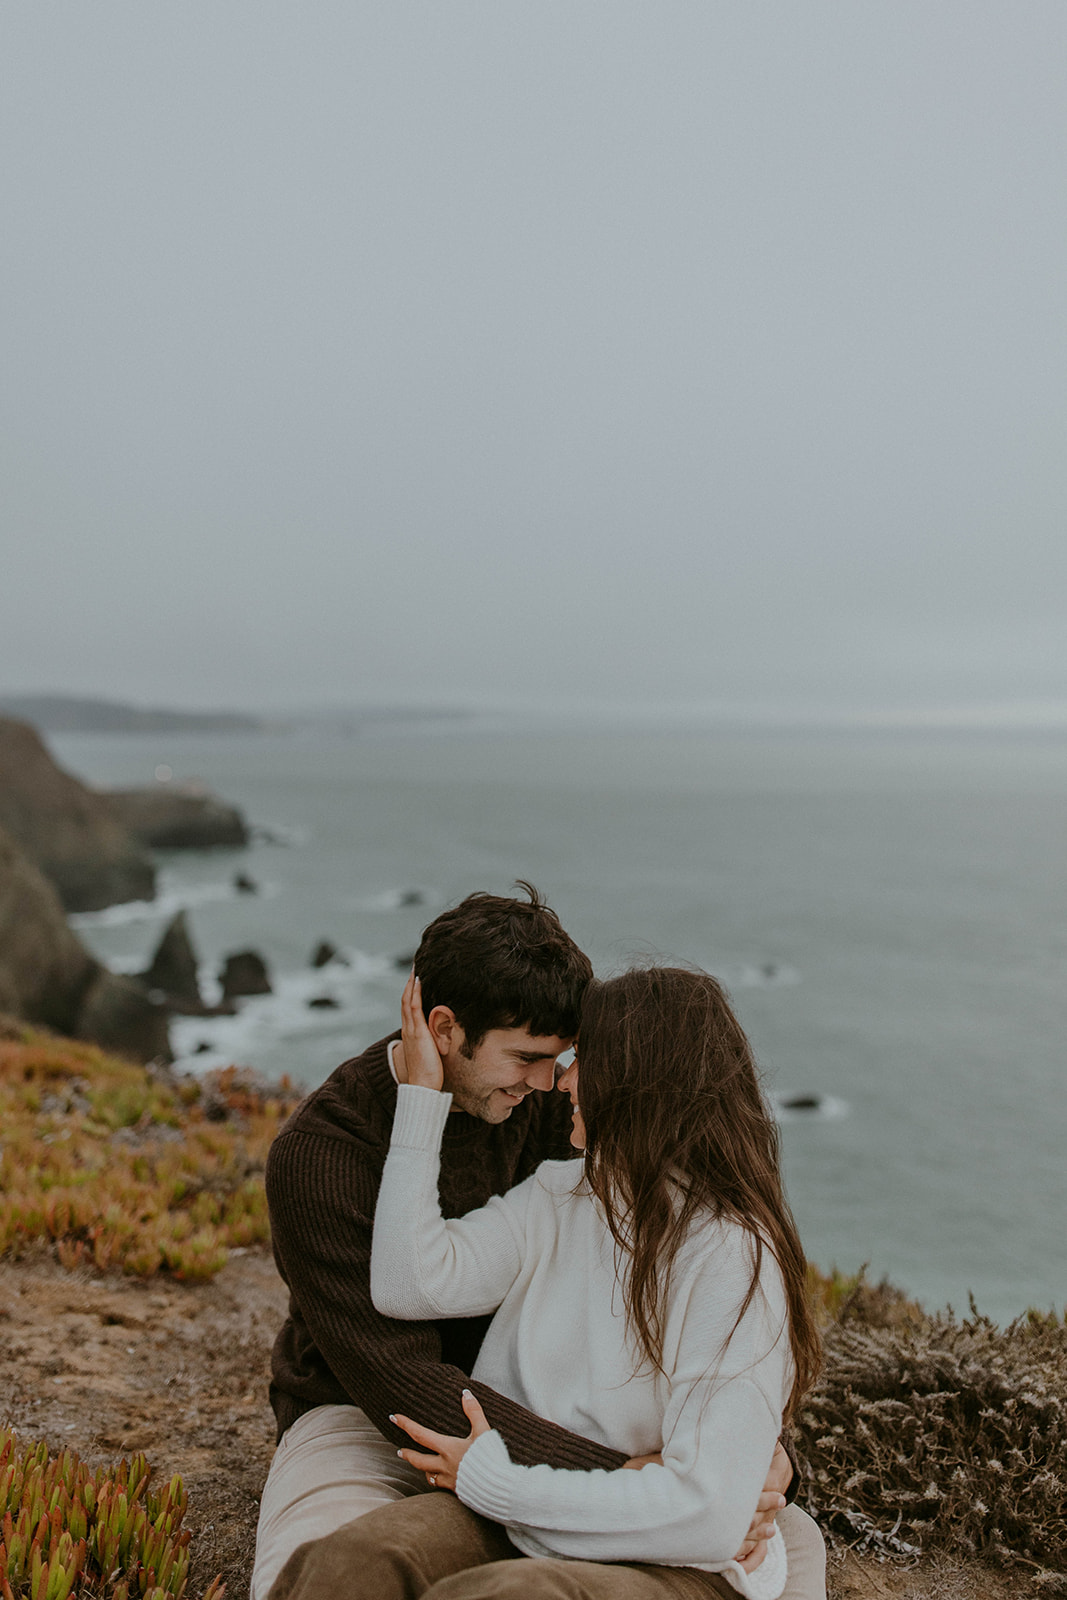 romantic outdoor winter engagement photos in san francisco. the couple embraces in neutral outfits. Photo taken by Codi Baer Photography